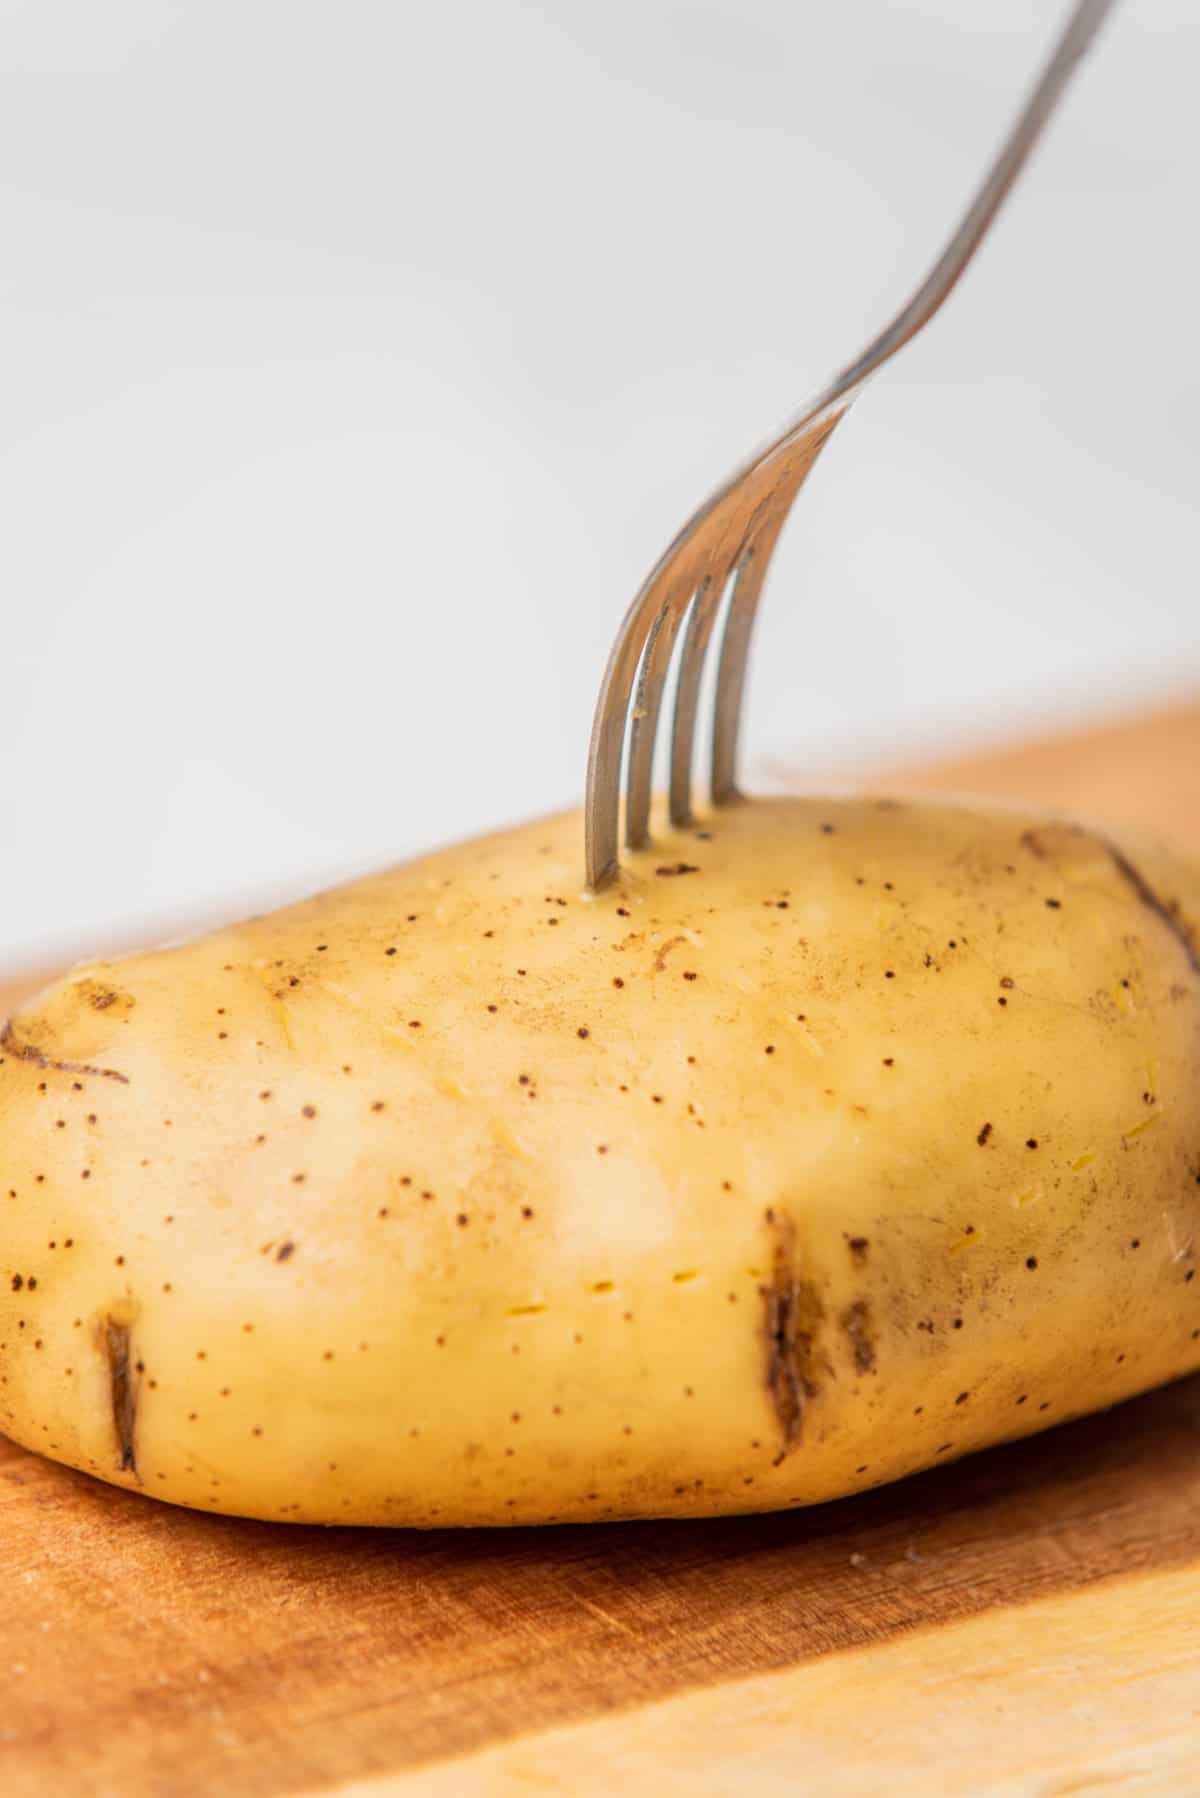 A photo of a potato being pierced with a fork